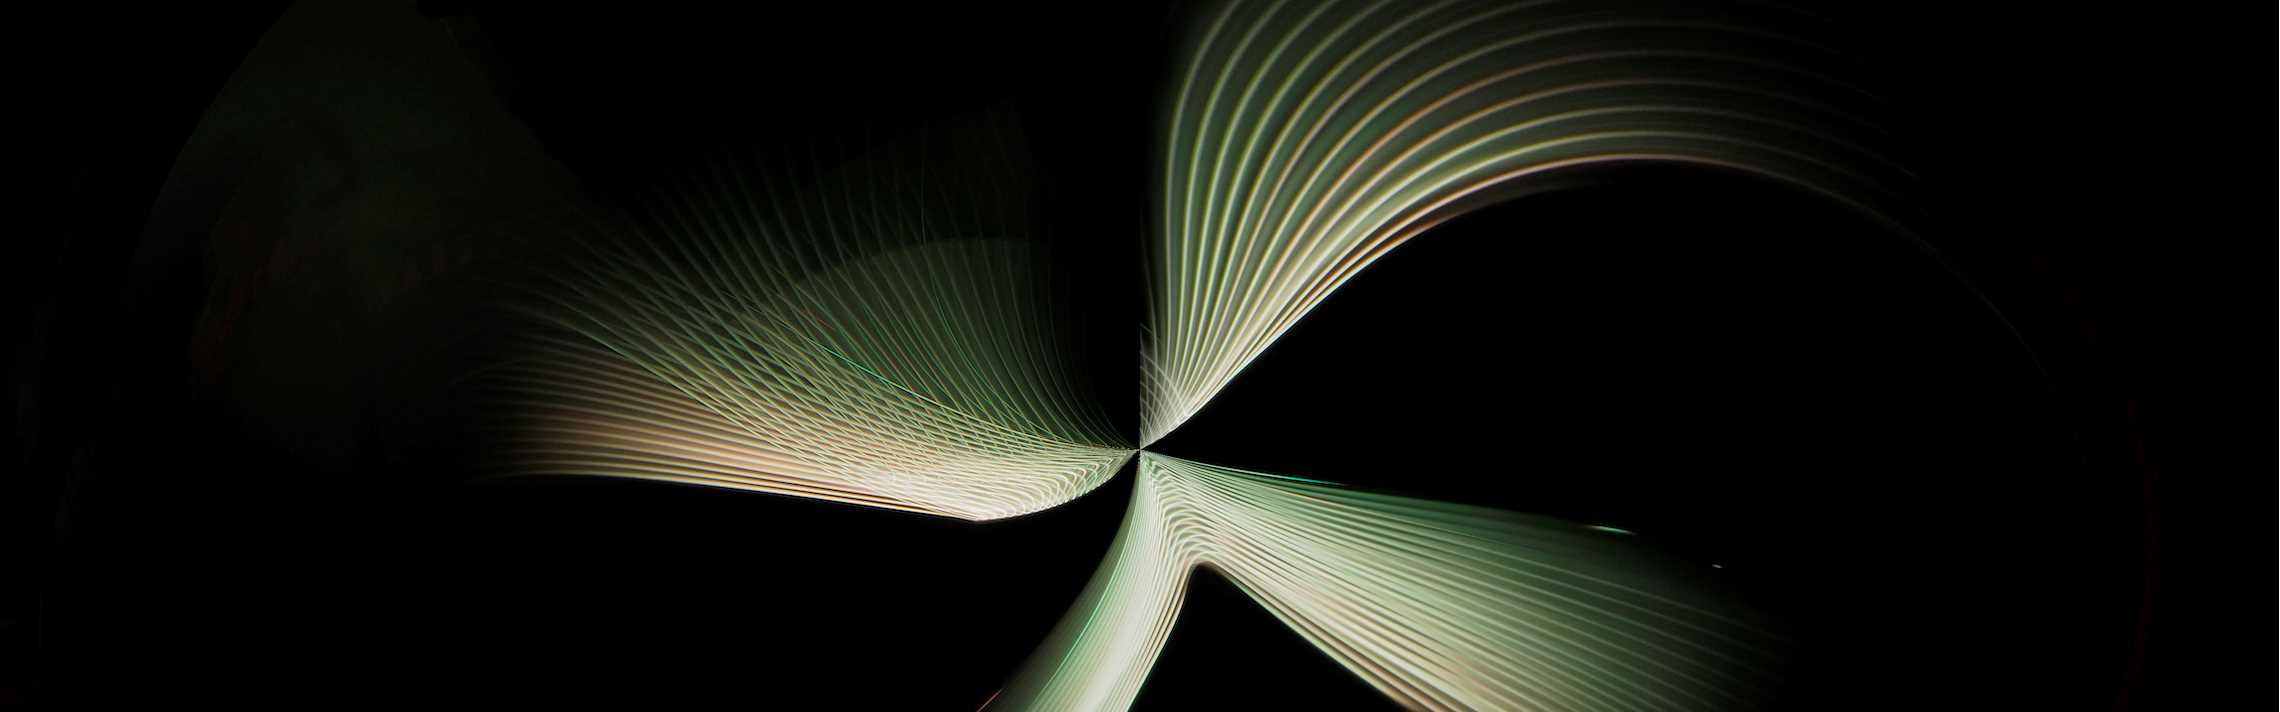 abstract green swirl with black background